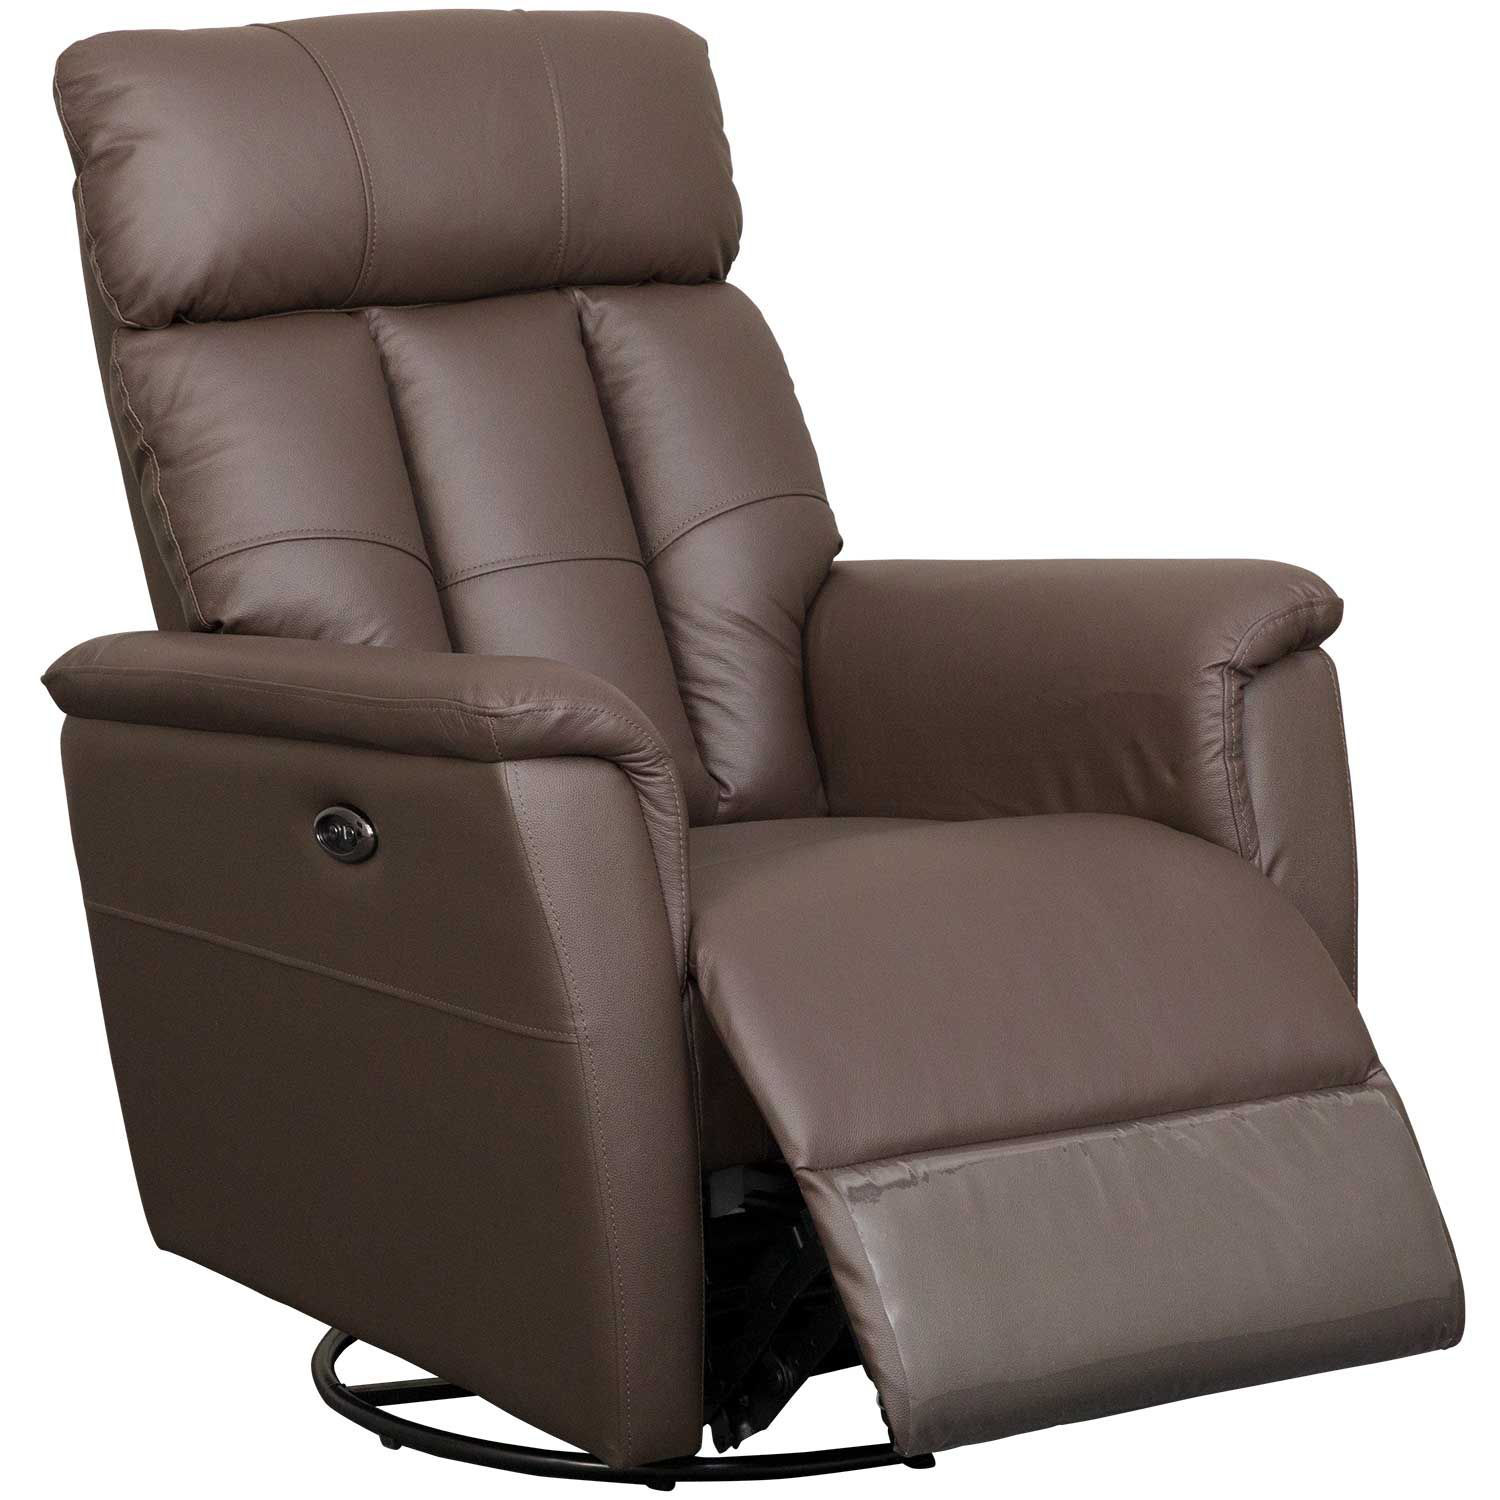 Swivel in Comfort: The Elegance of a Leather Recliner Swivel Chair缩略图